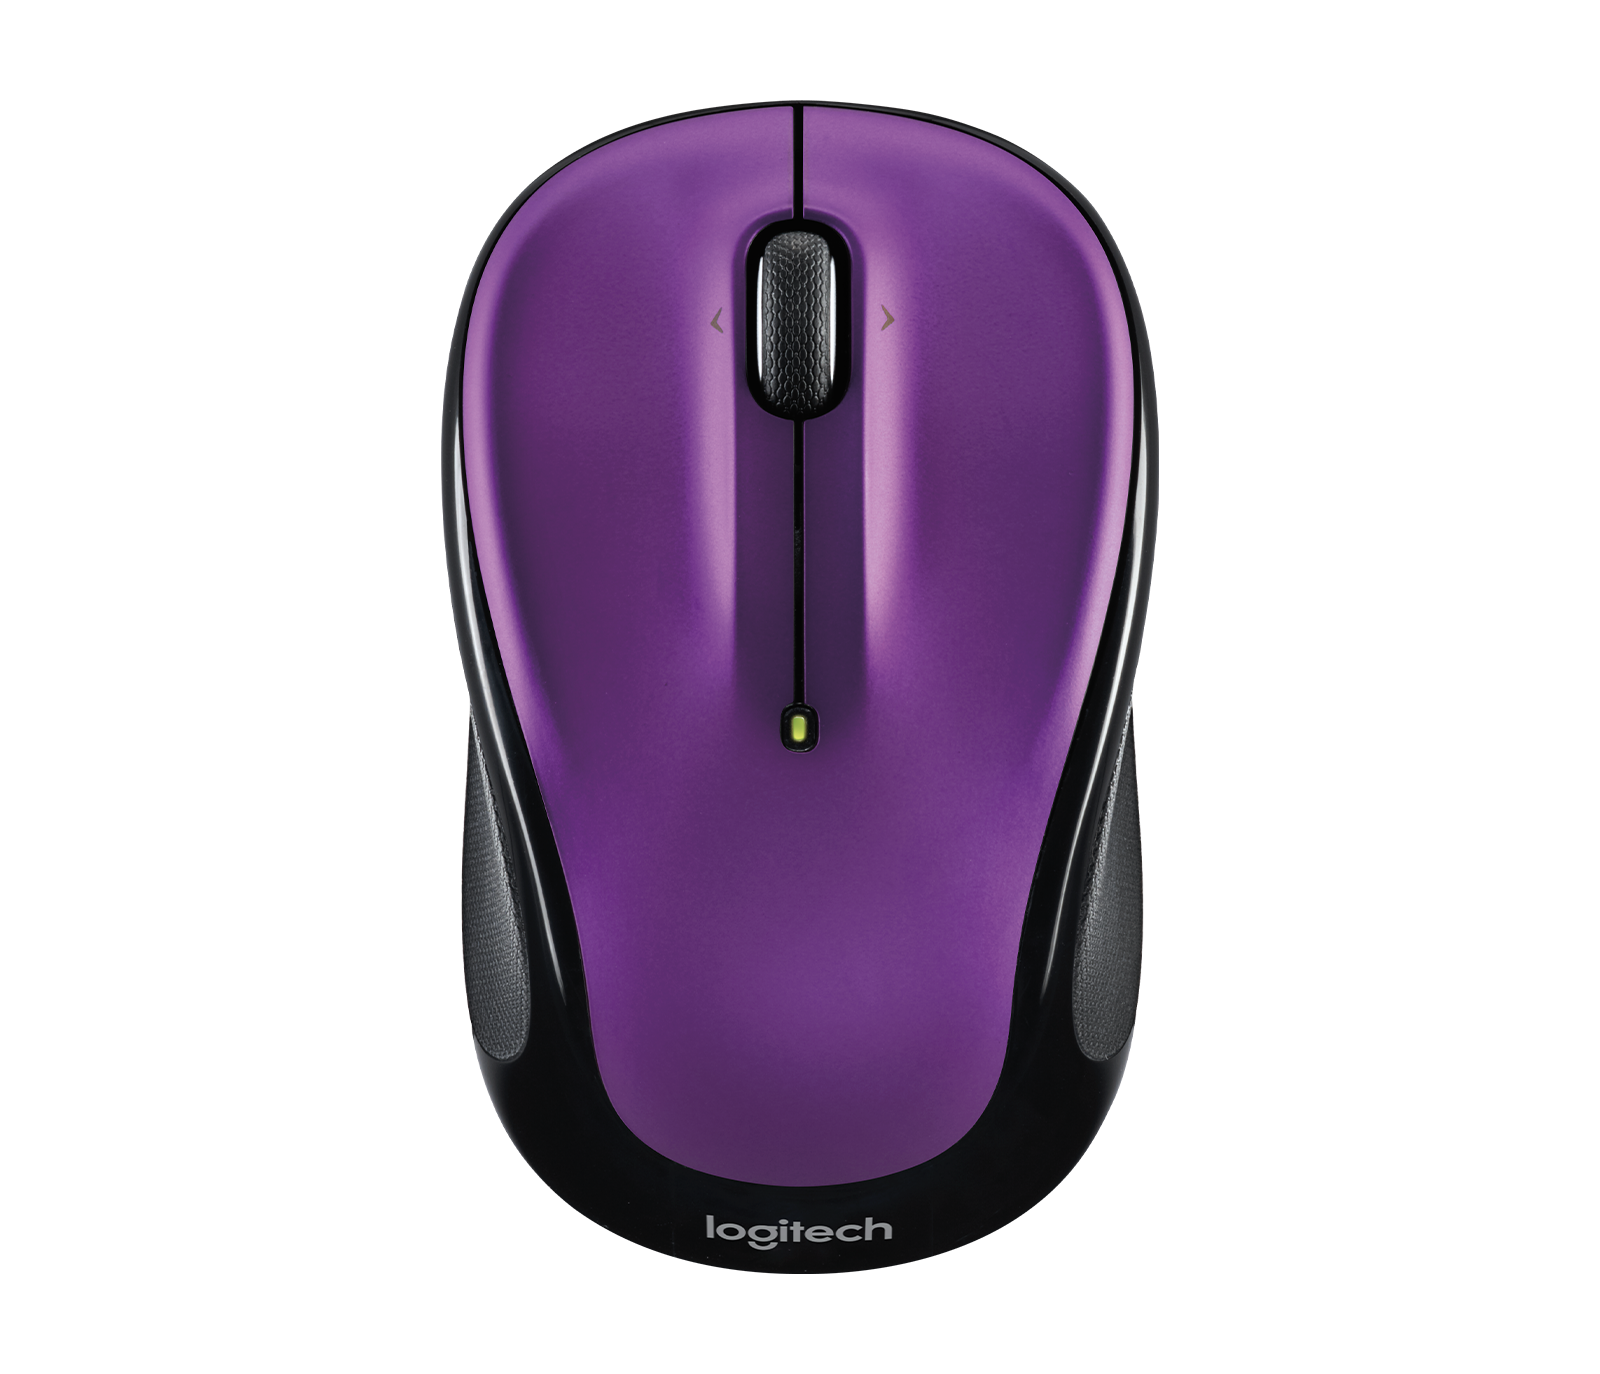 Brilliant Rose Logitech M325 Wireless Mouse for Web Scrolling